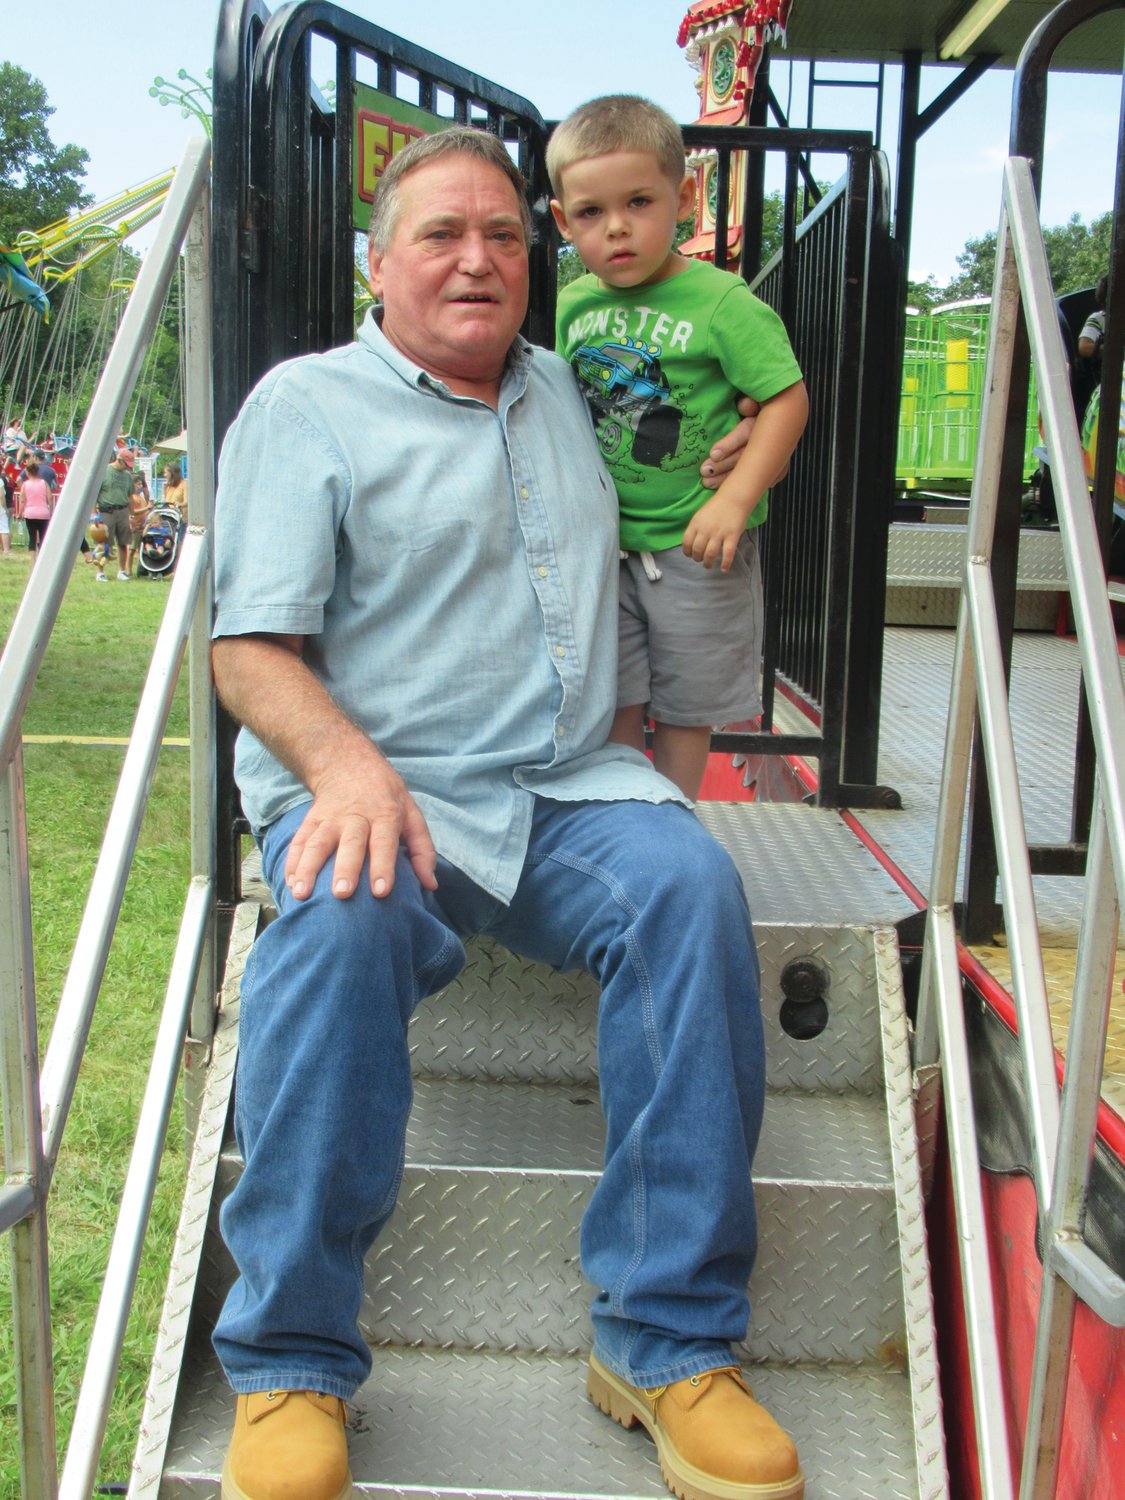 GRAMP’S GUY: Johnston resident Dennis Cardillo brought his grandson to the festival so he could enjoy the many offerings for kids.